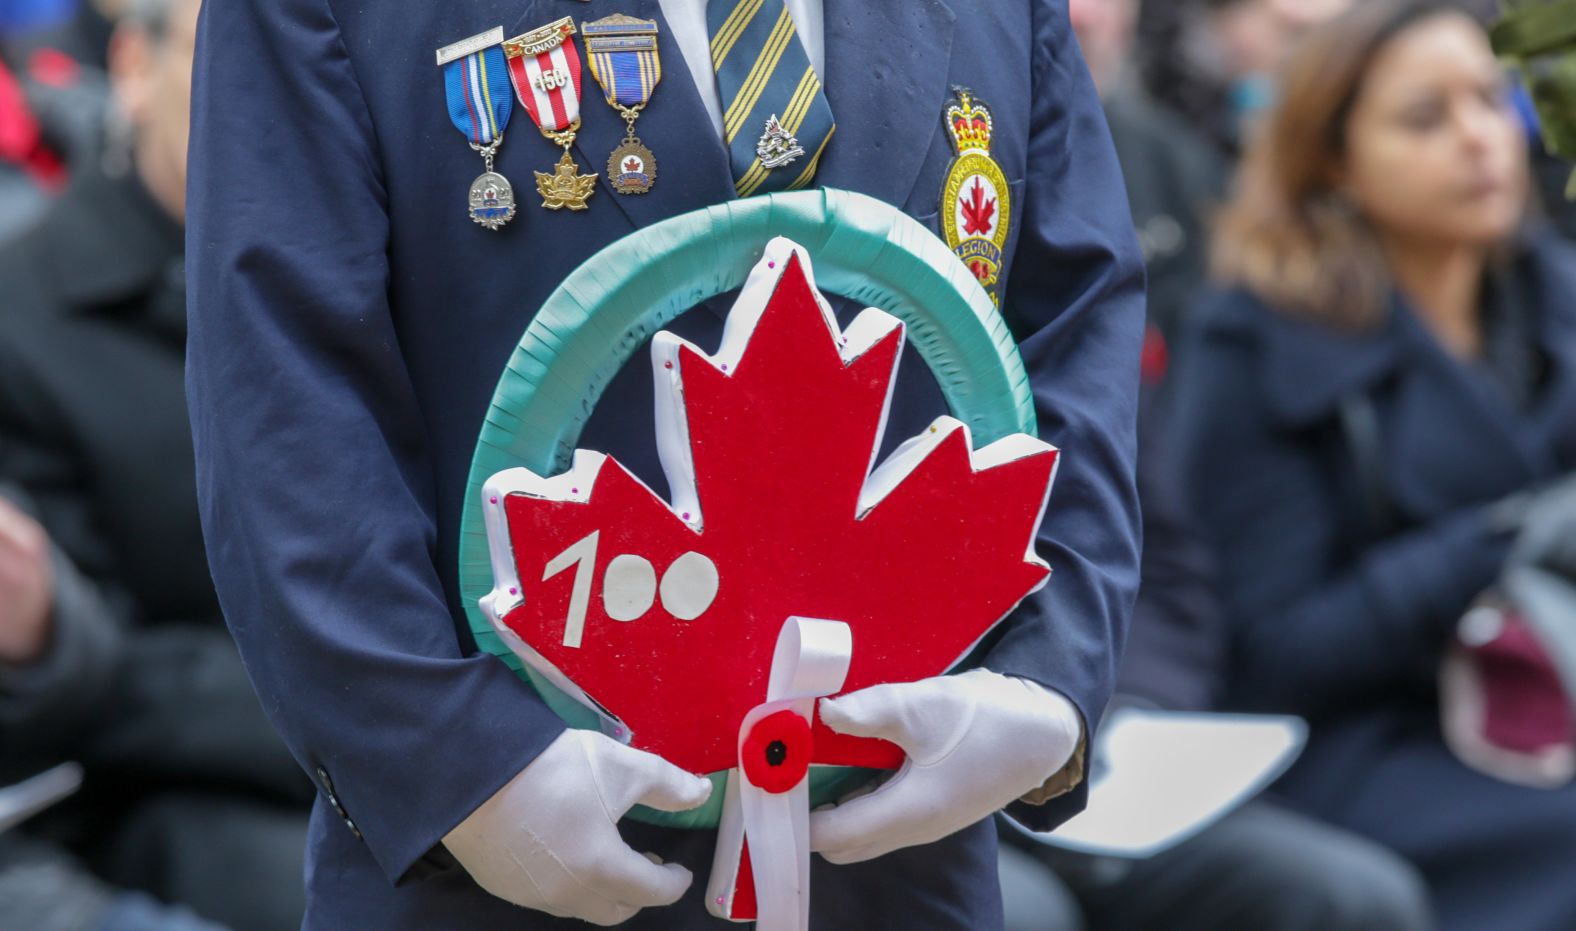 A veteran holds a wreath during a ceremony Sunday in Toronto.